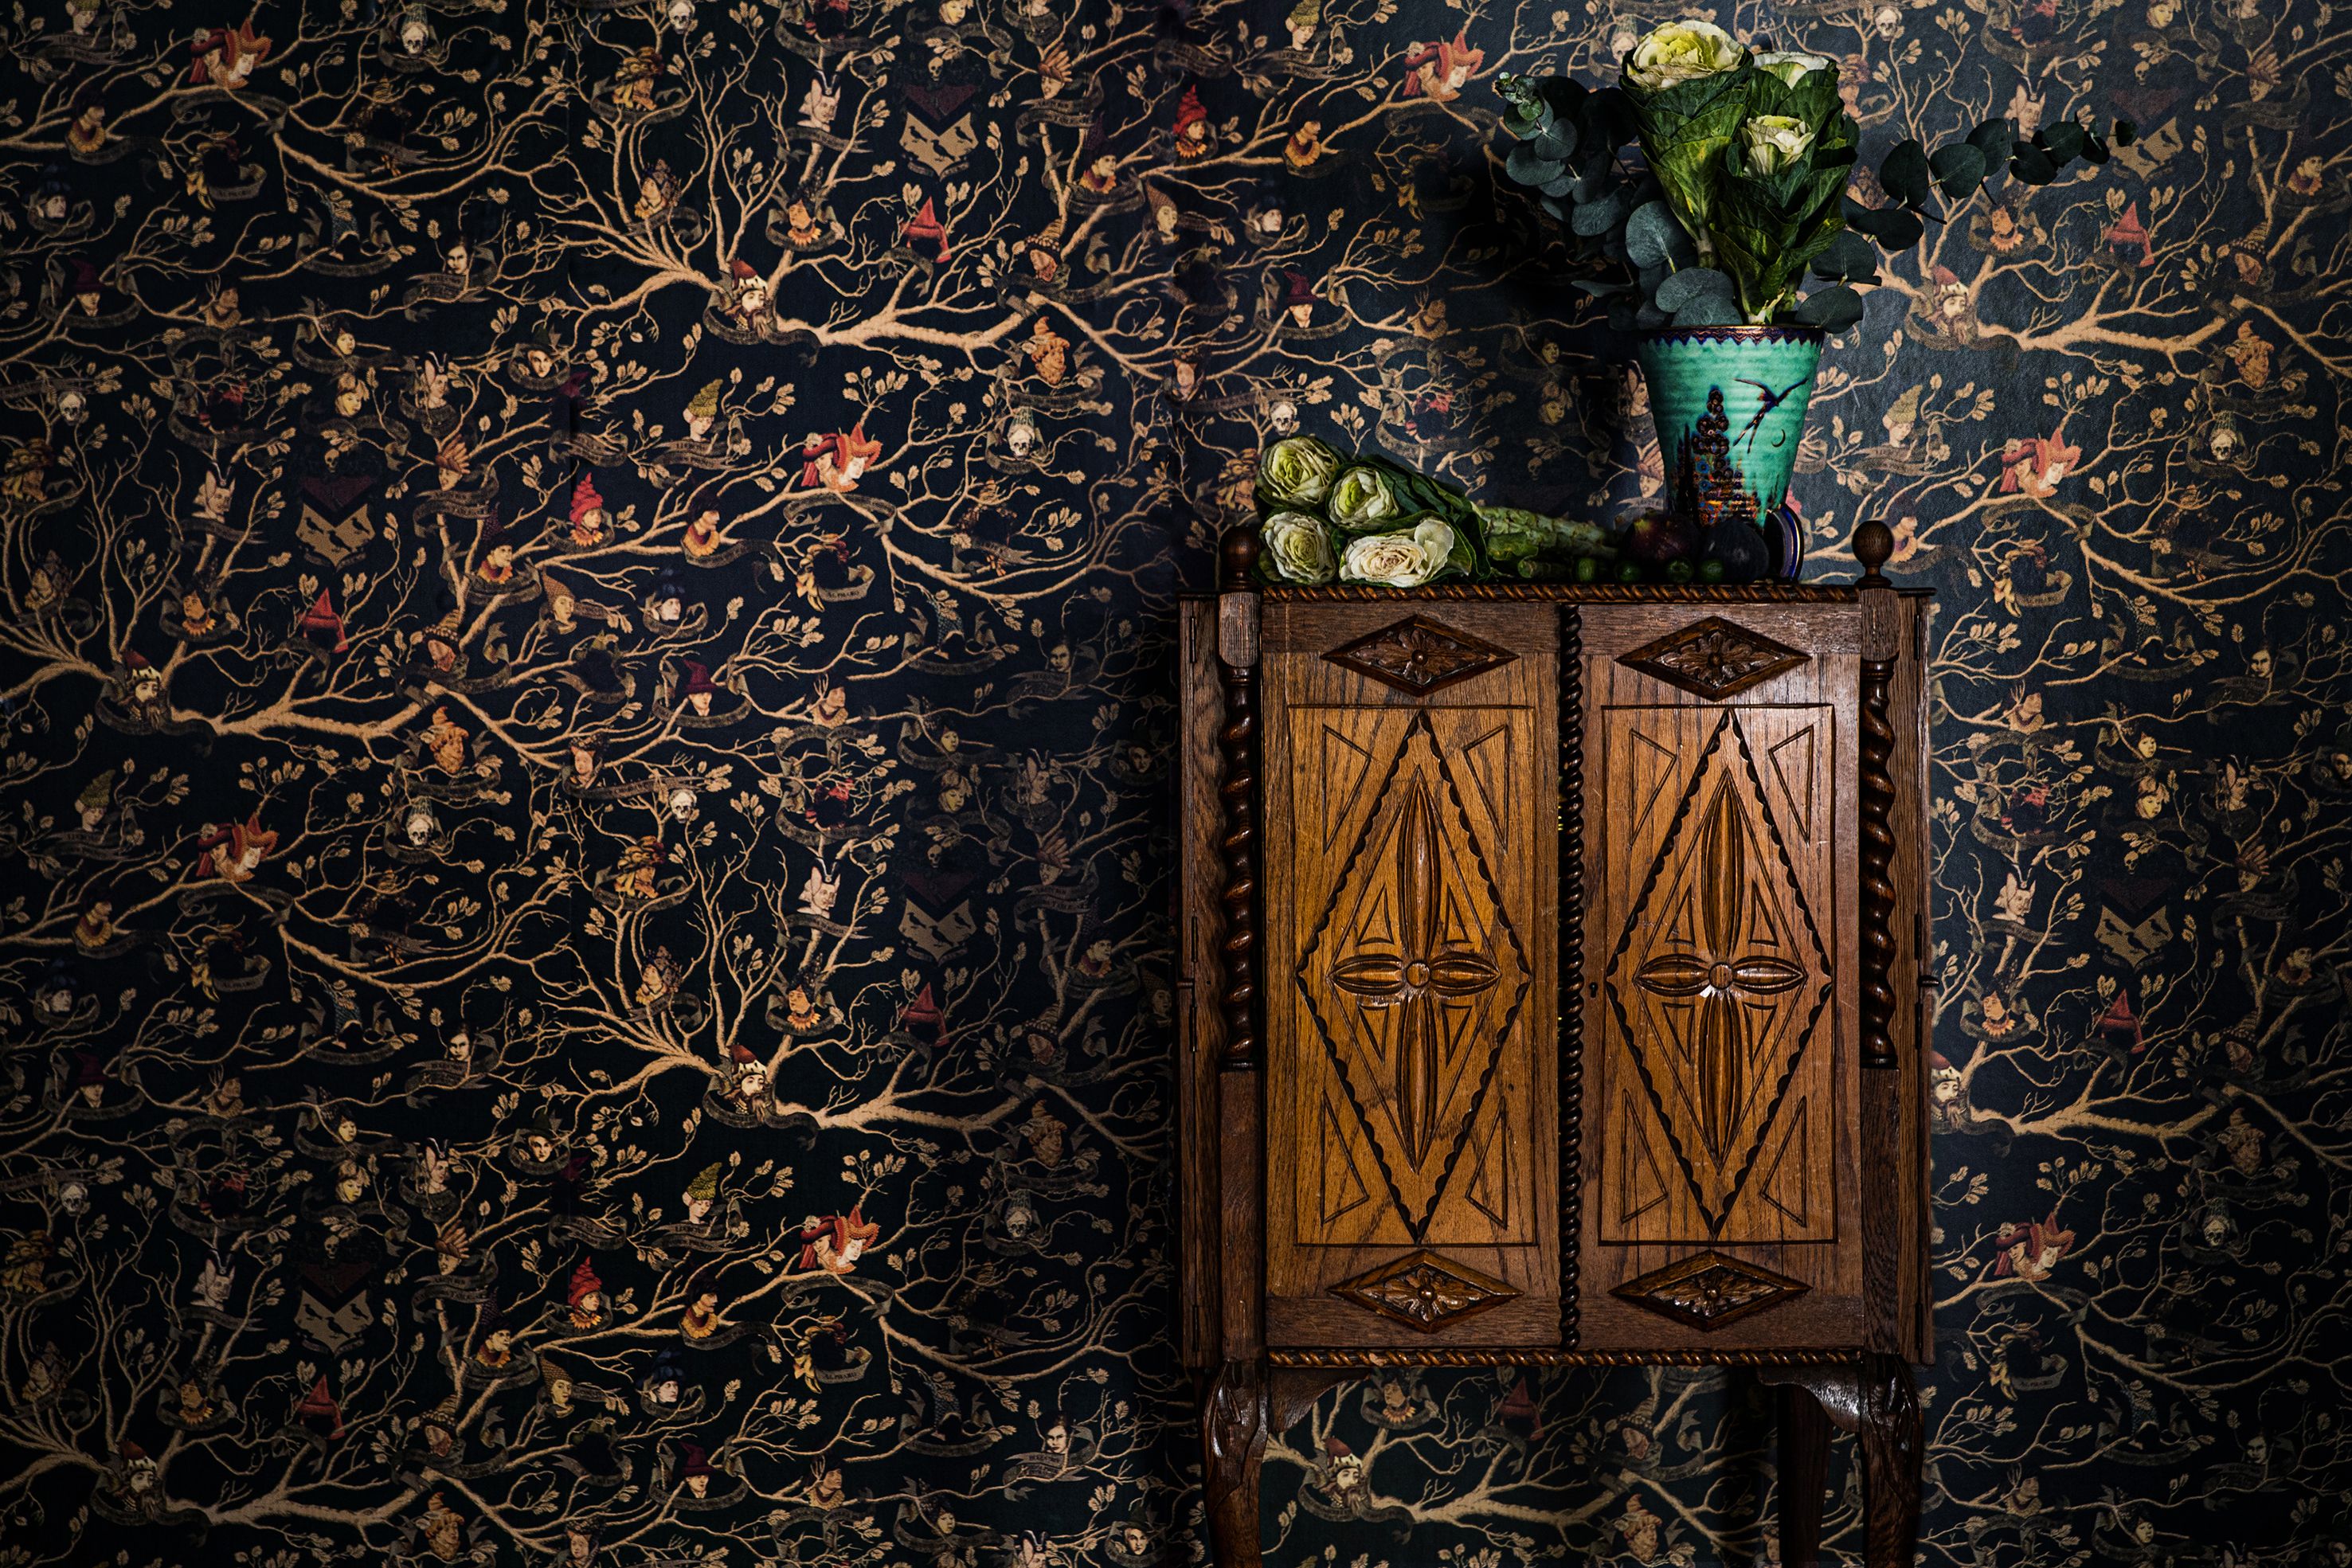 MinaLima launches Harry Potter wallpaper collection